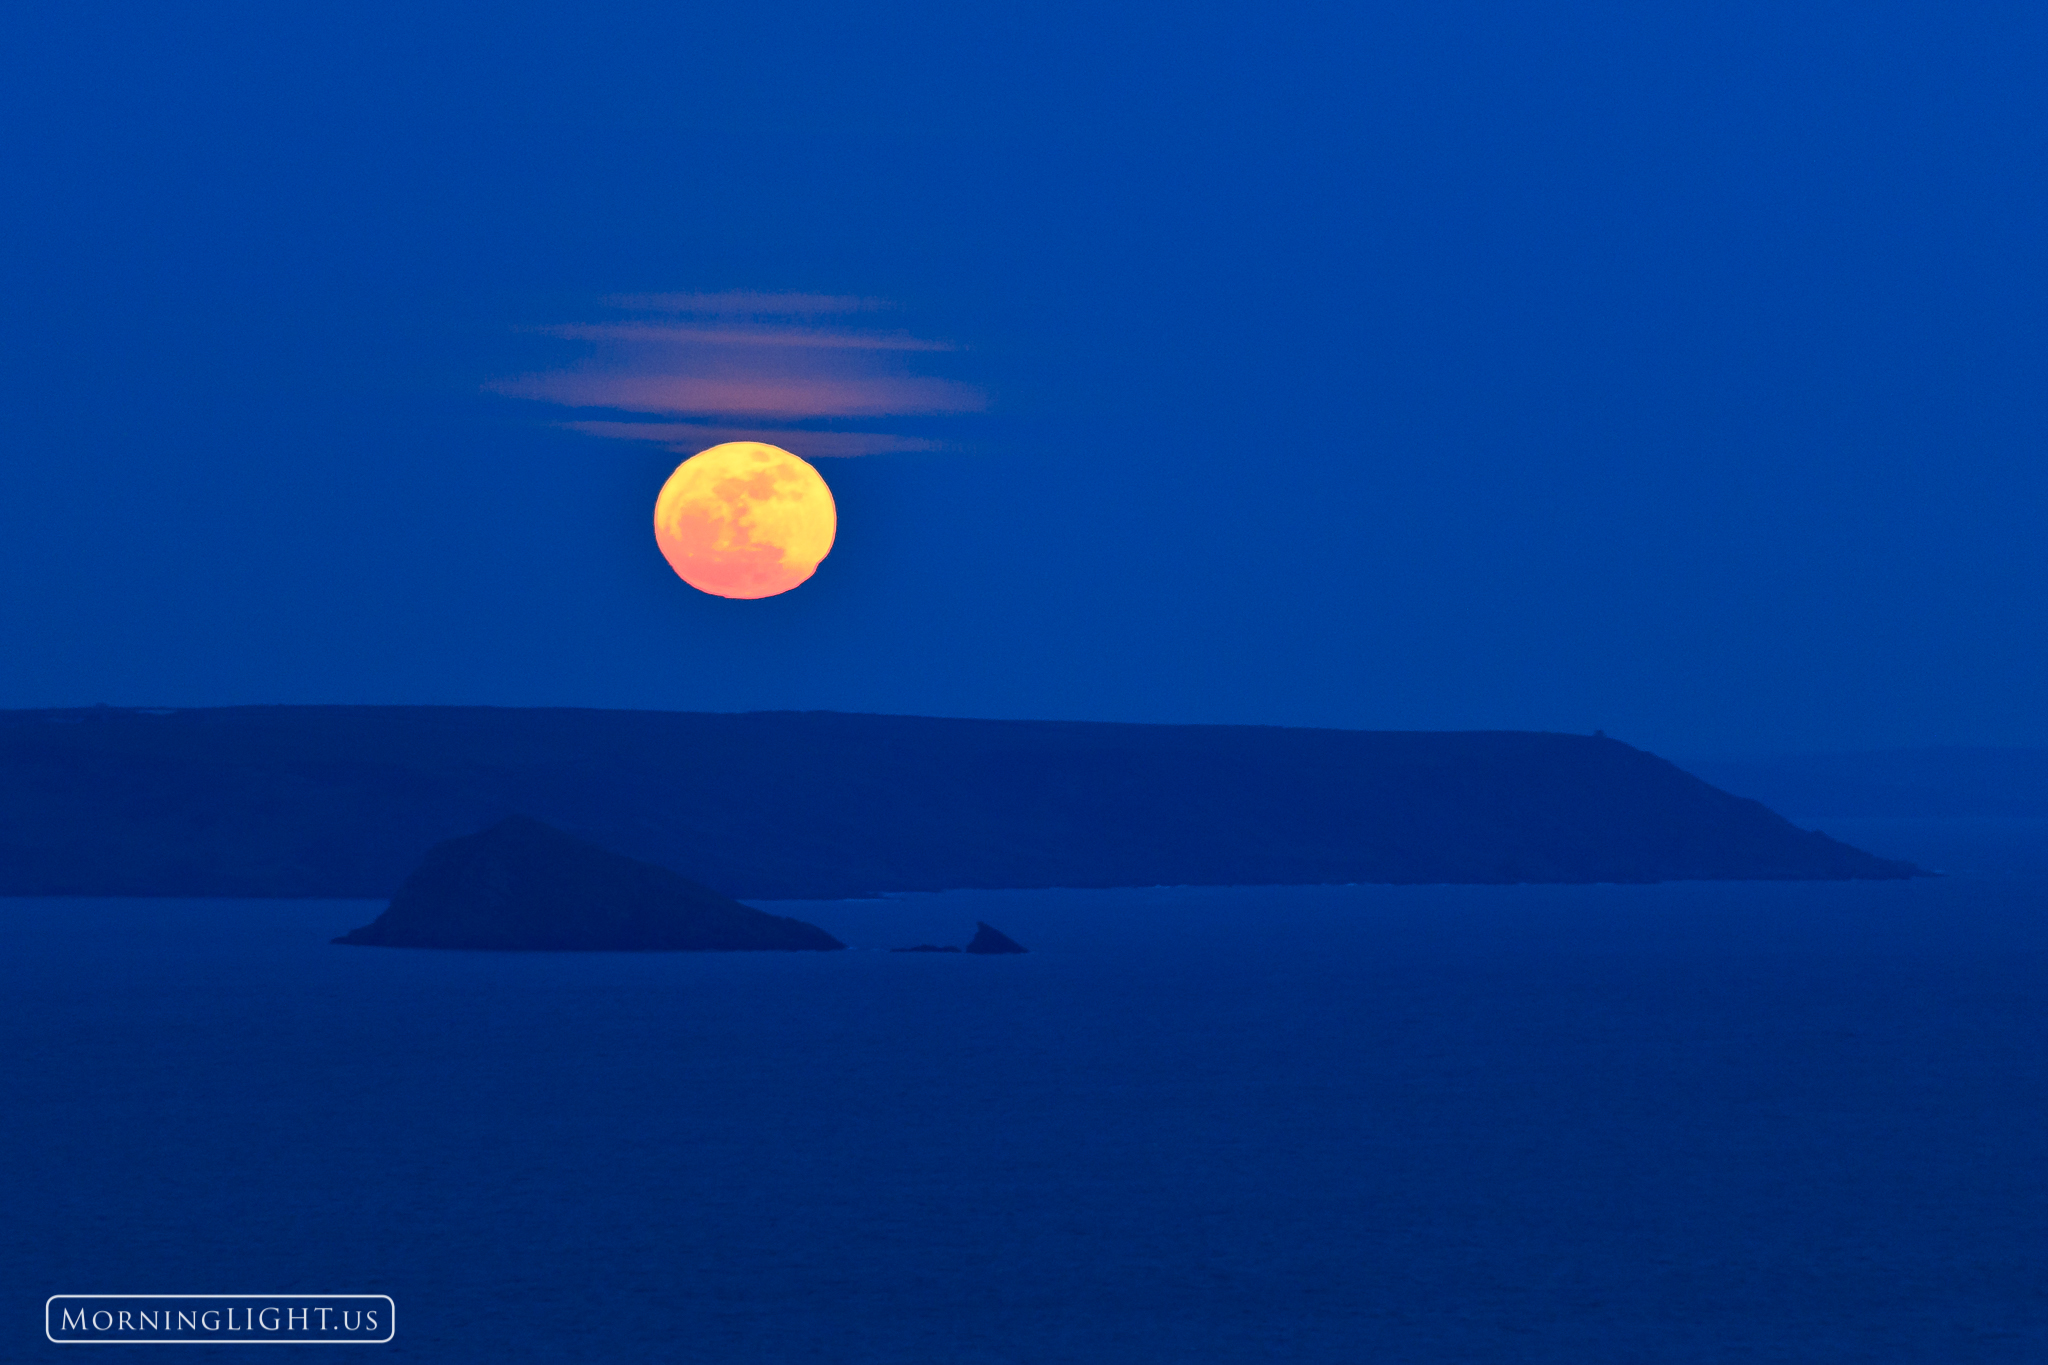 On this evening the largest moon for the next 18 years rose over Plymouth Sound in Devon, England. I was in the UK with my wife...